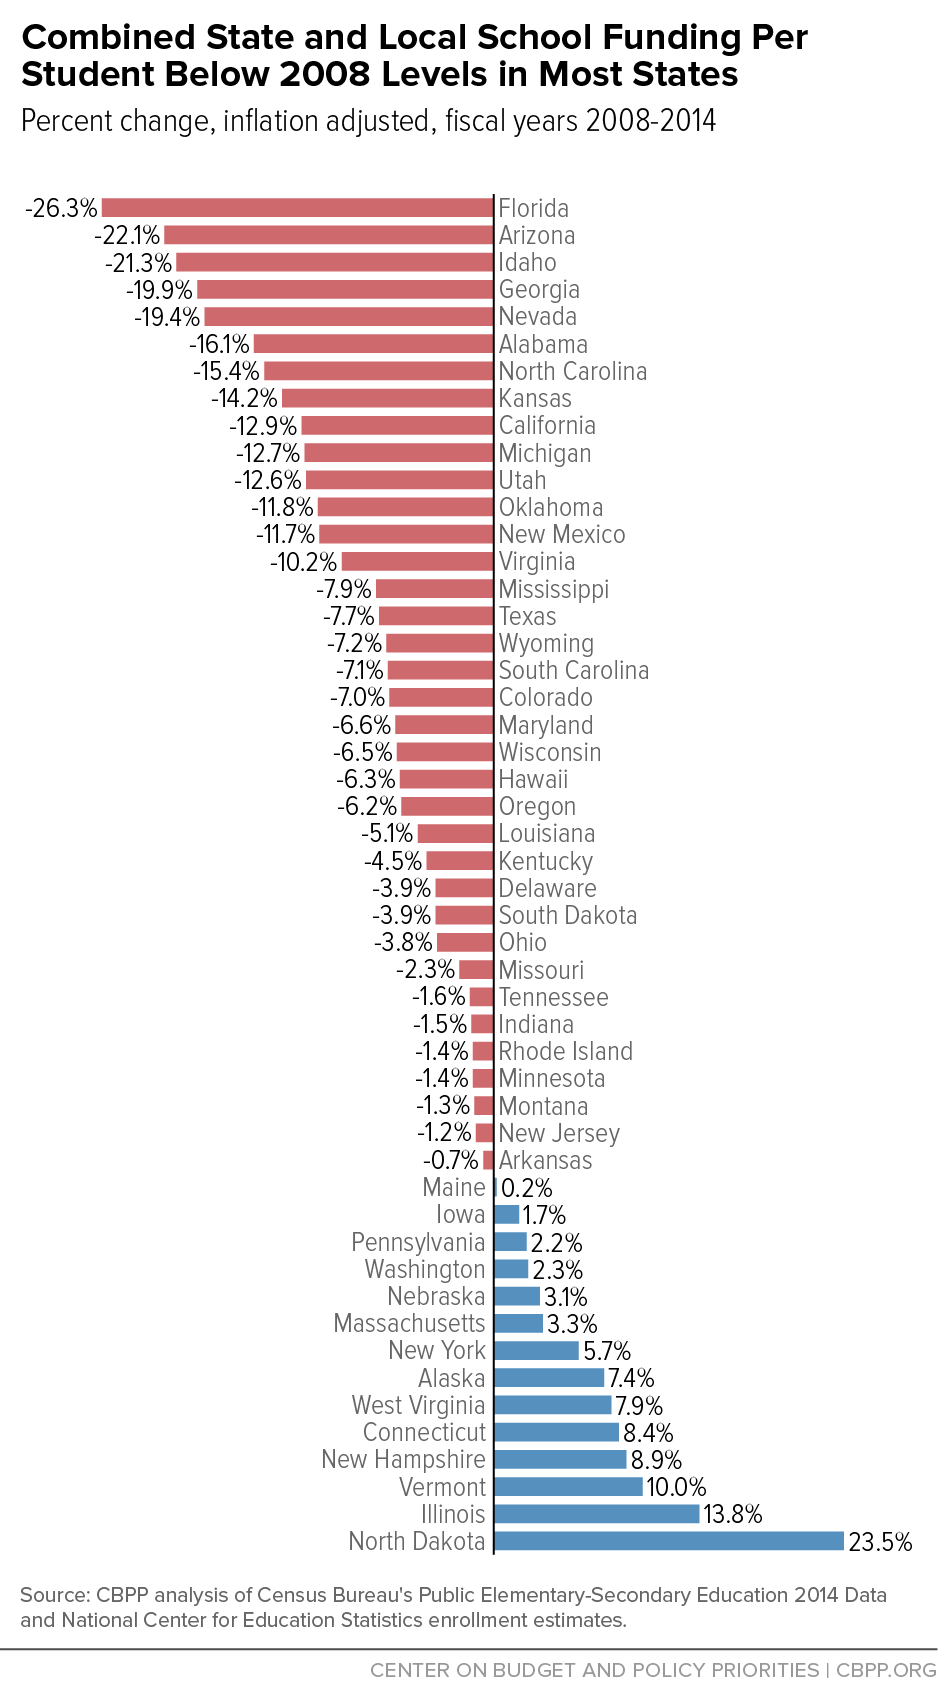 Combined State and Local School Funding Per Student Below 2008 Levels in Most States